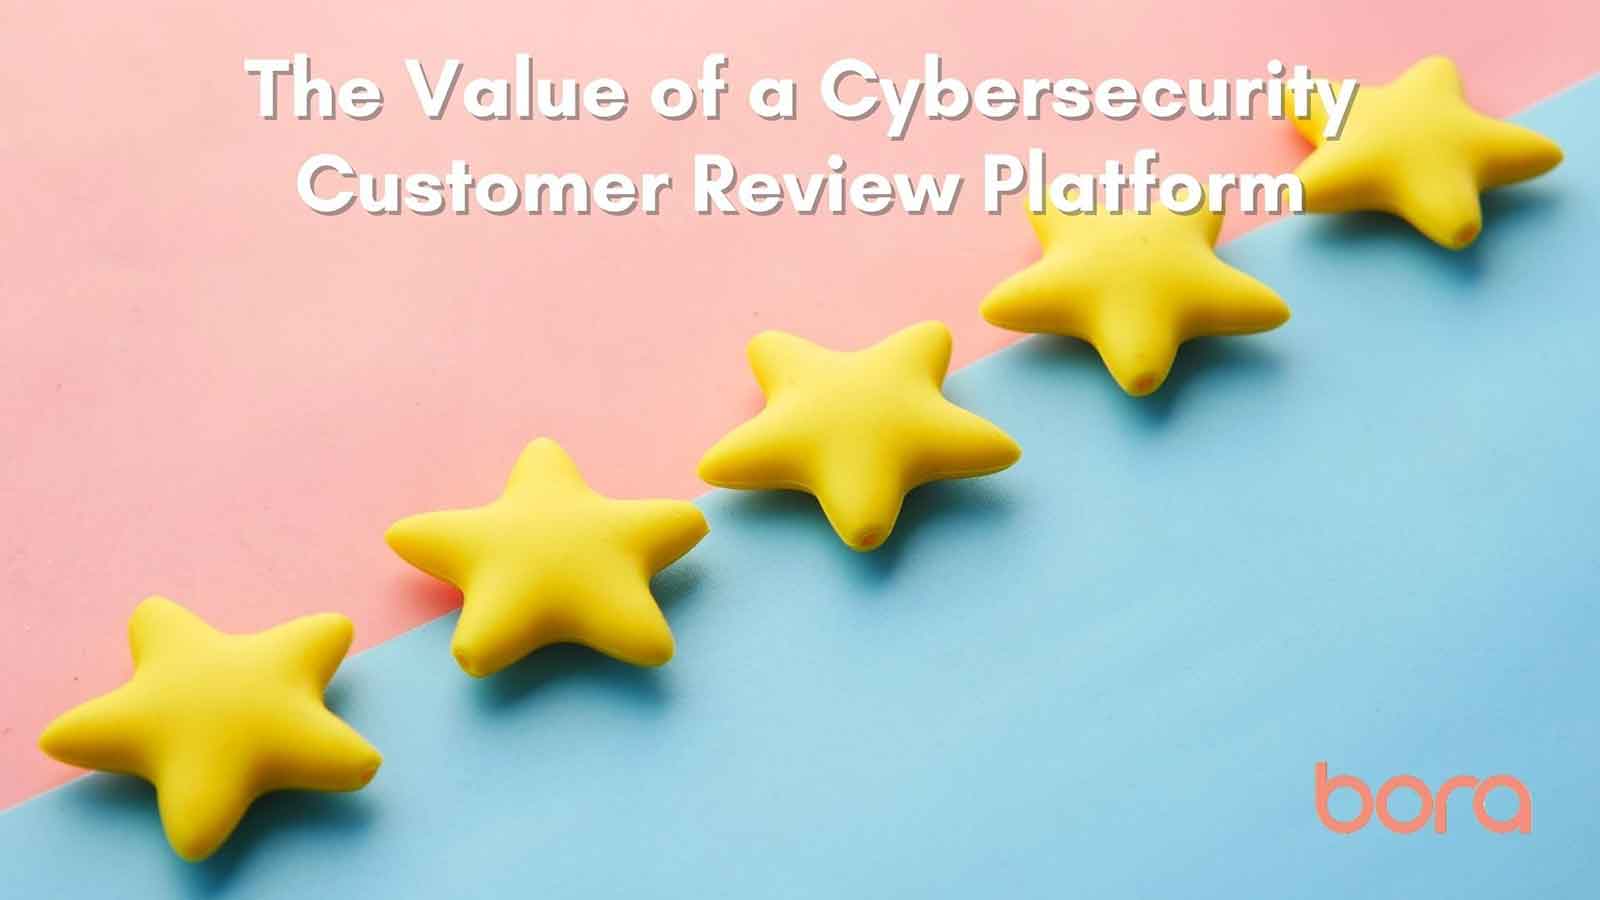 The Value of a Cybersecurity Customer Review Platform